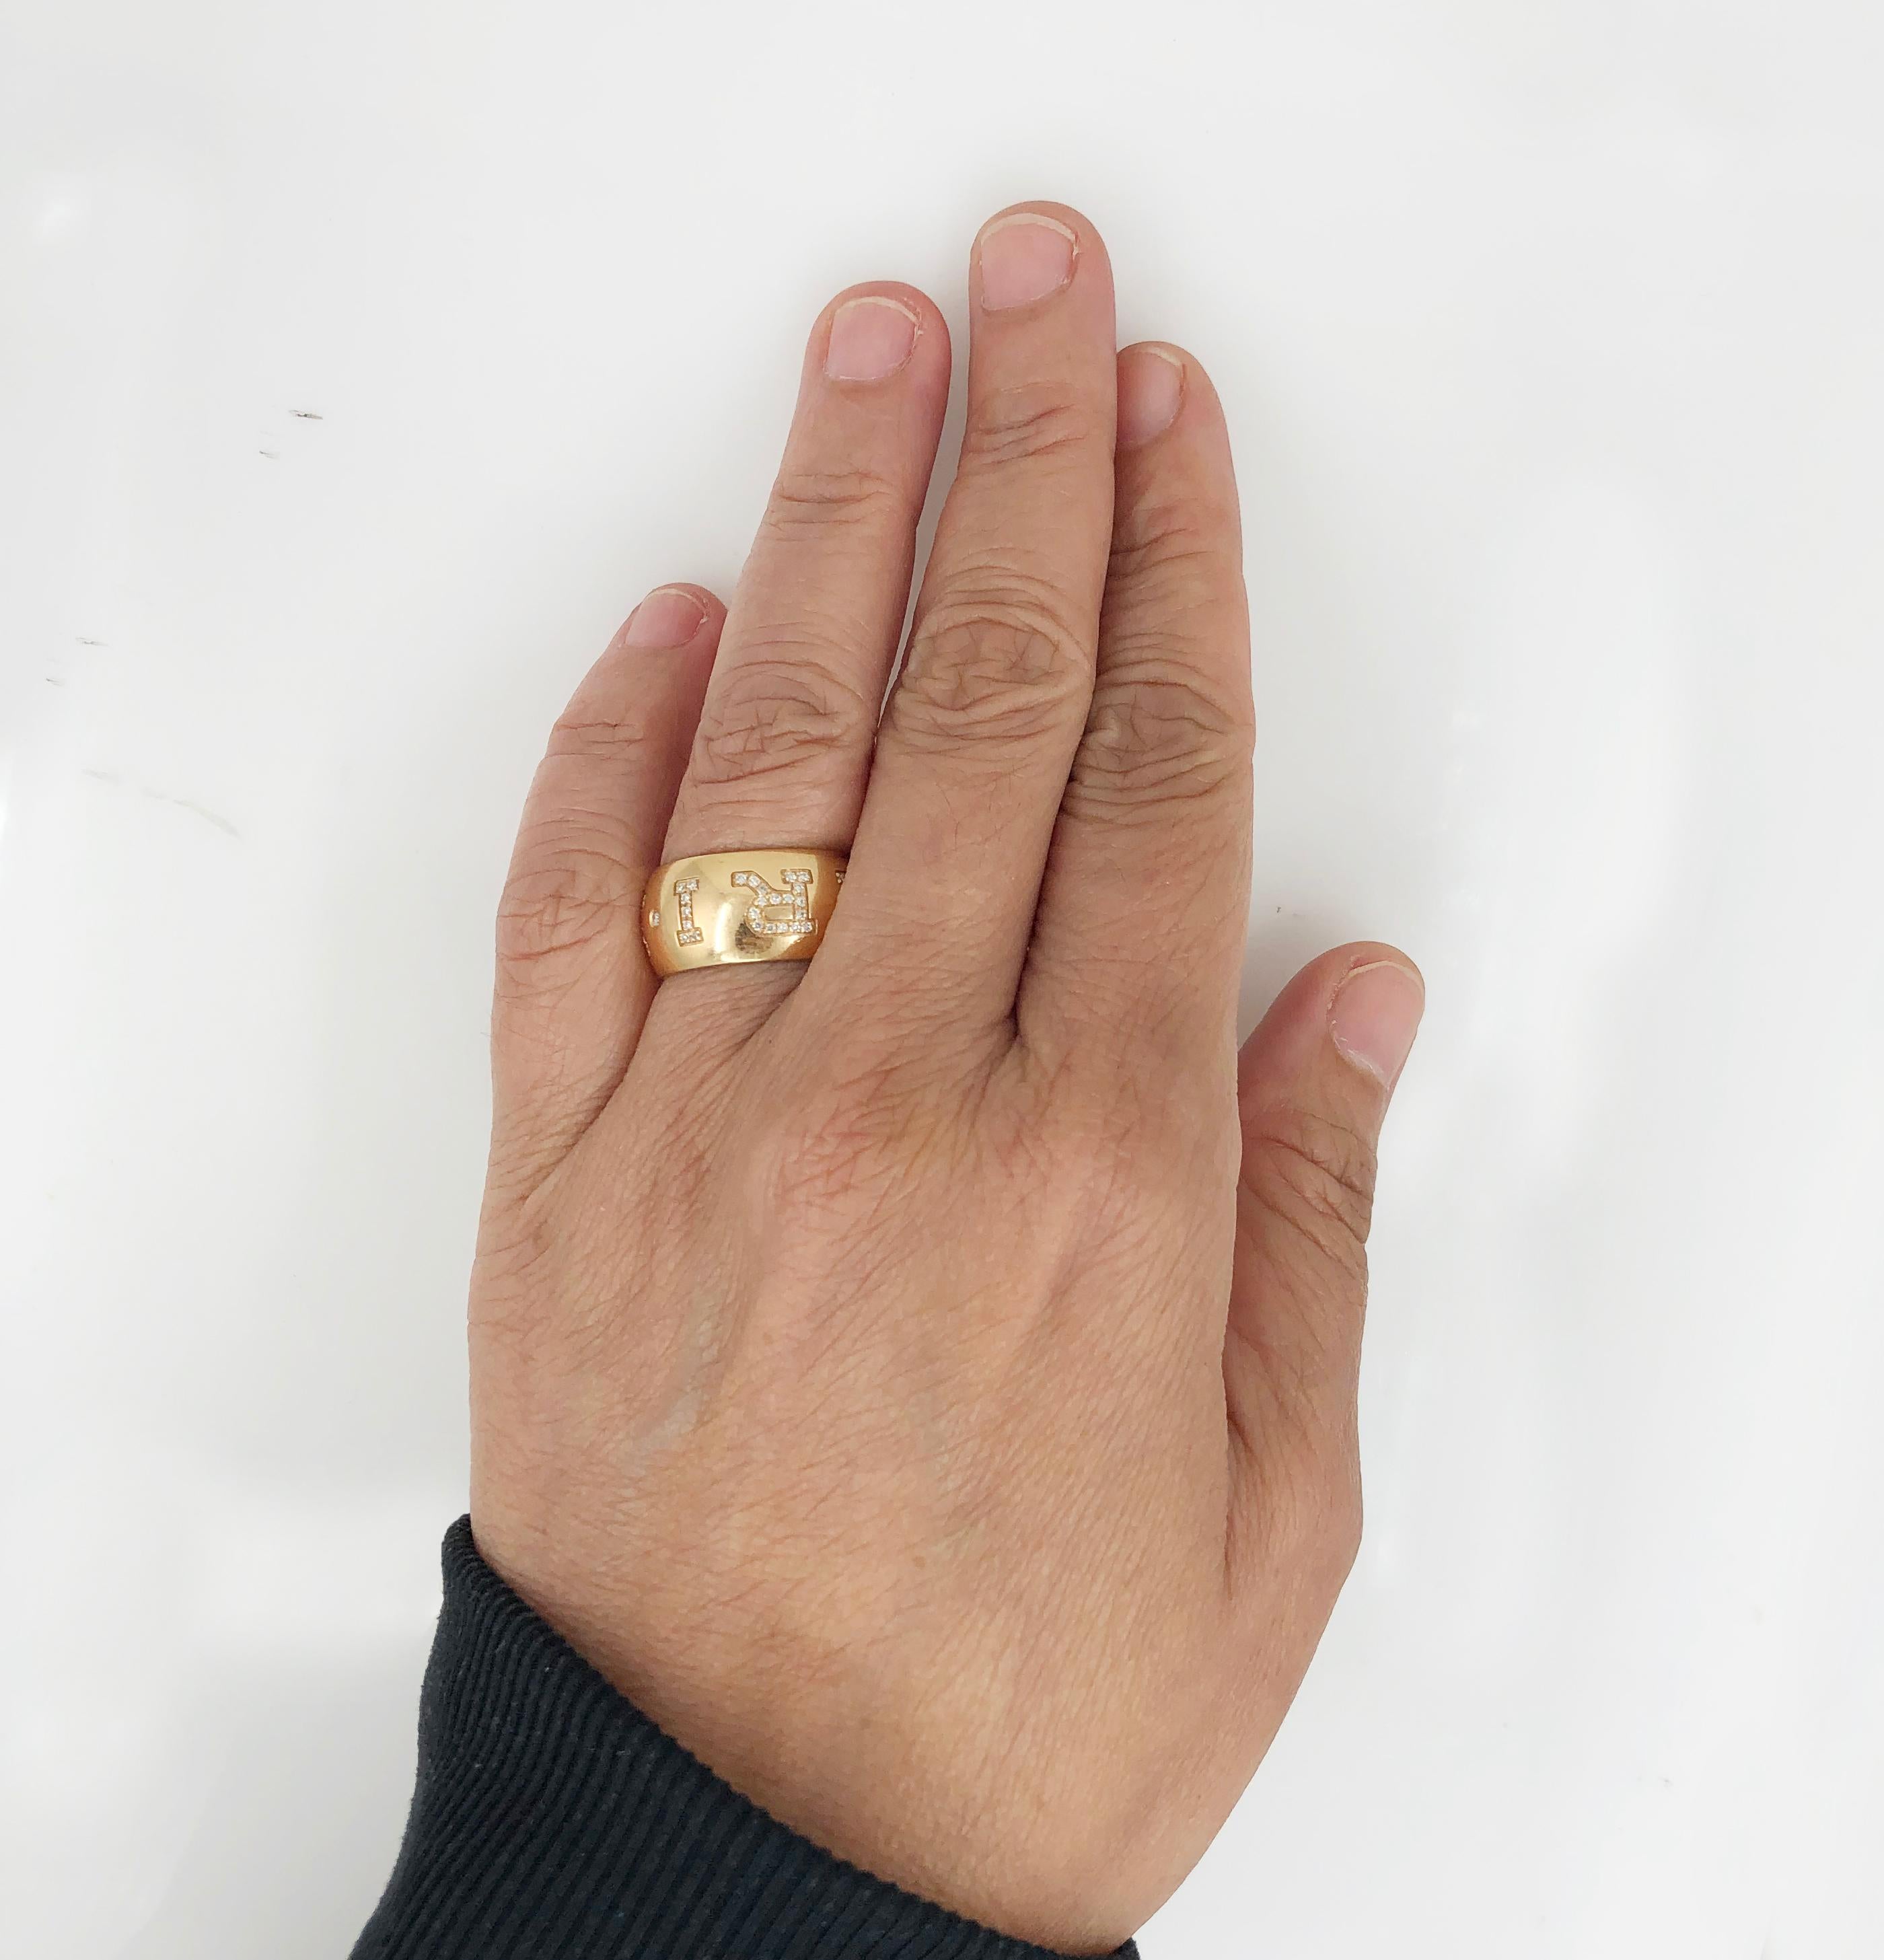 Ladies 18k rose gold Bvlgari Monologo ring with inlaid logo embellished with round brilliant cut diamonds. 
Signed Bvlgari, 
size 54. (6.75 US)
Condition: Good - Previously owned and gently worn, with little signs of use. May show light scratches